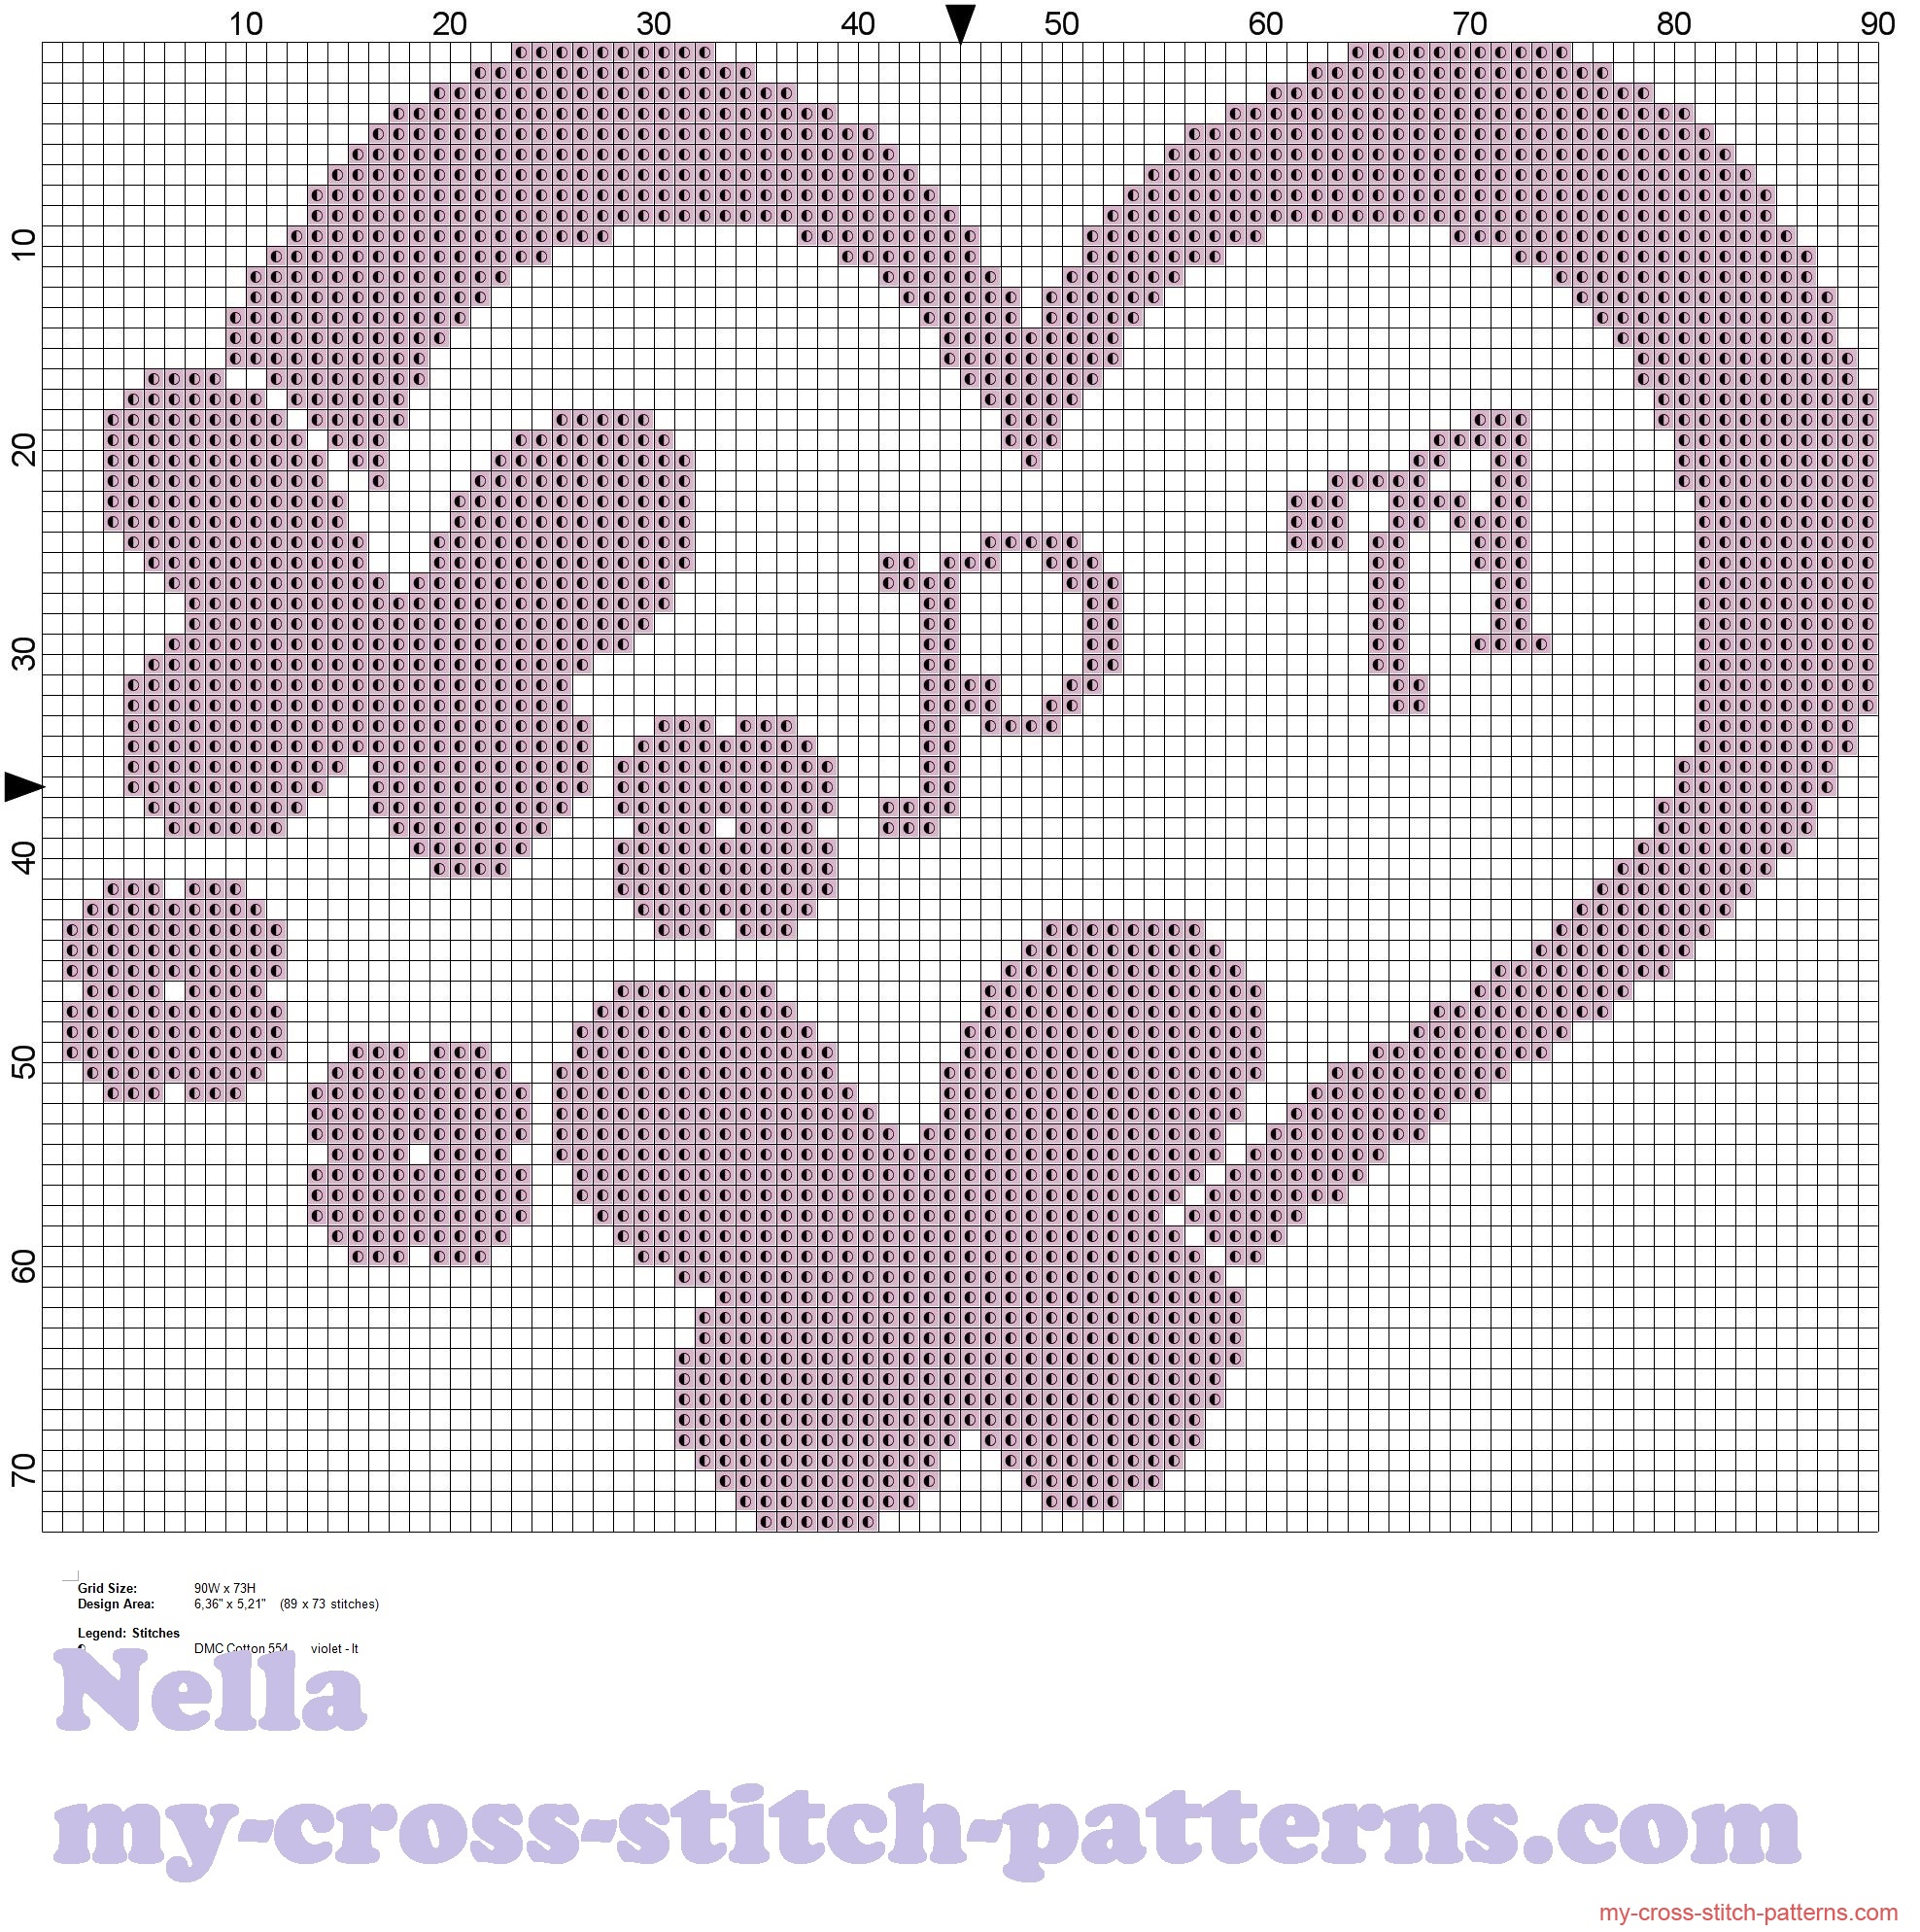 pillow_rings_heart_with_monochrome_butterflies